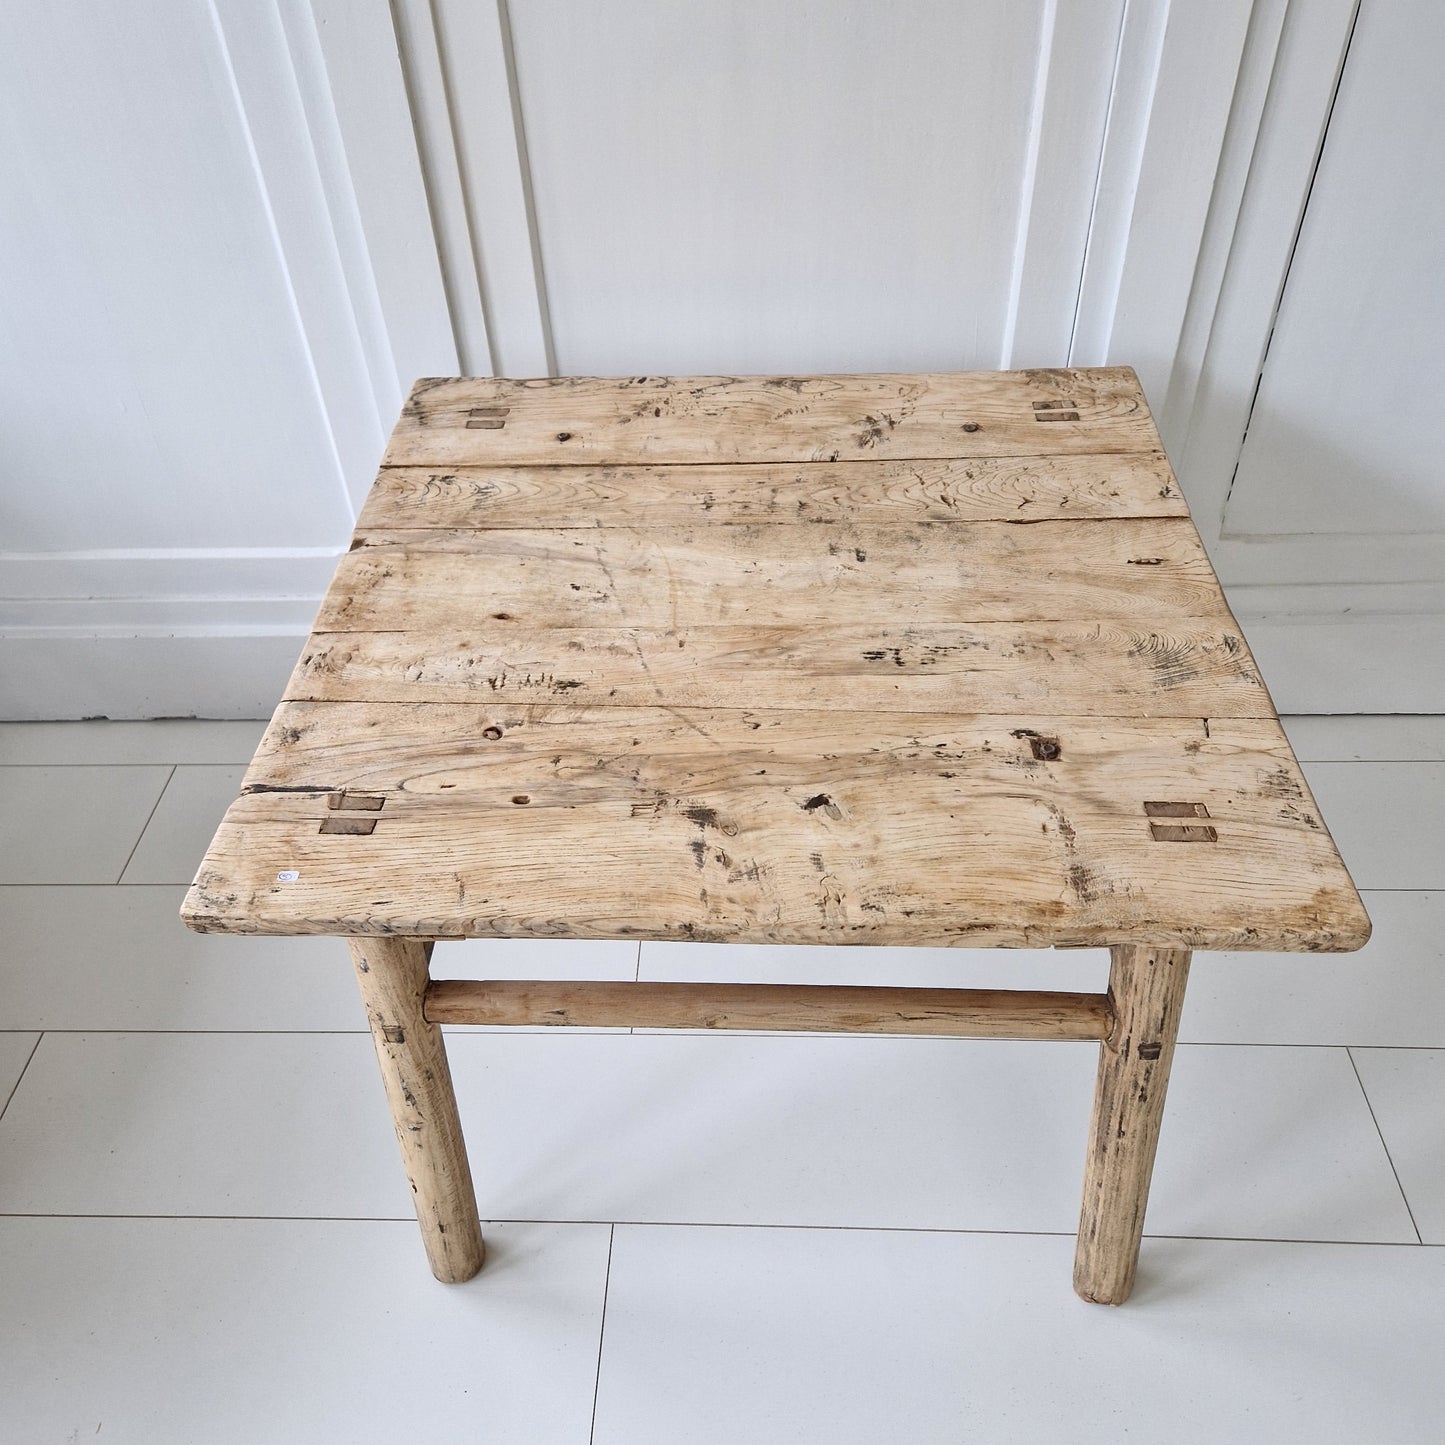 Chinese old wooden table (67x68x51,5cm)